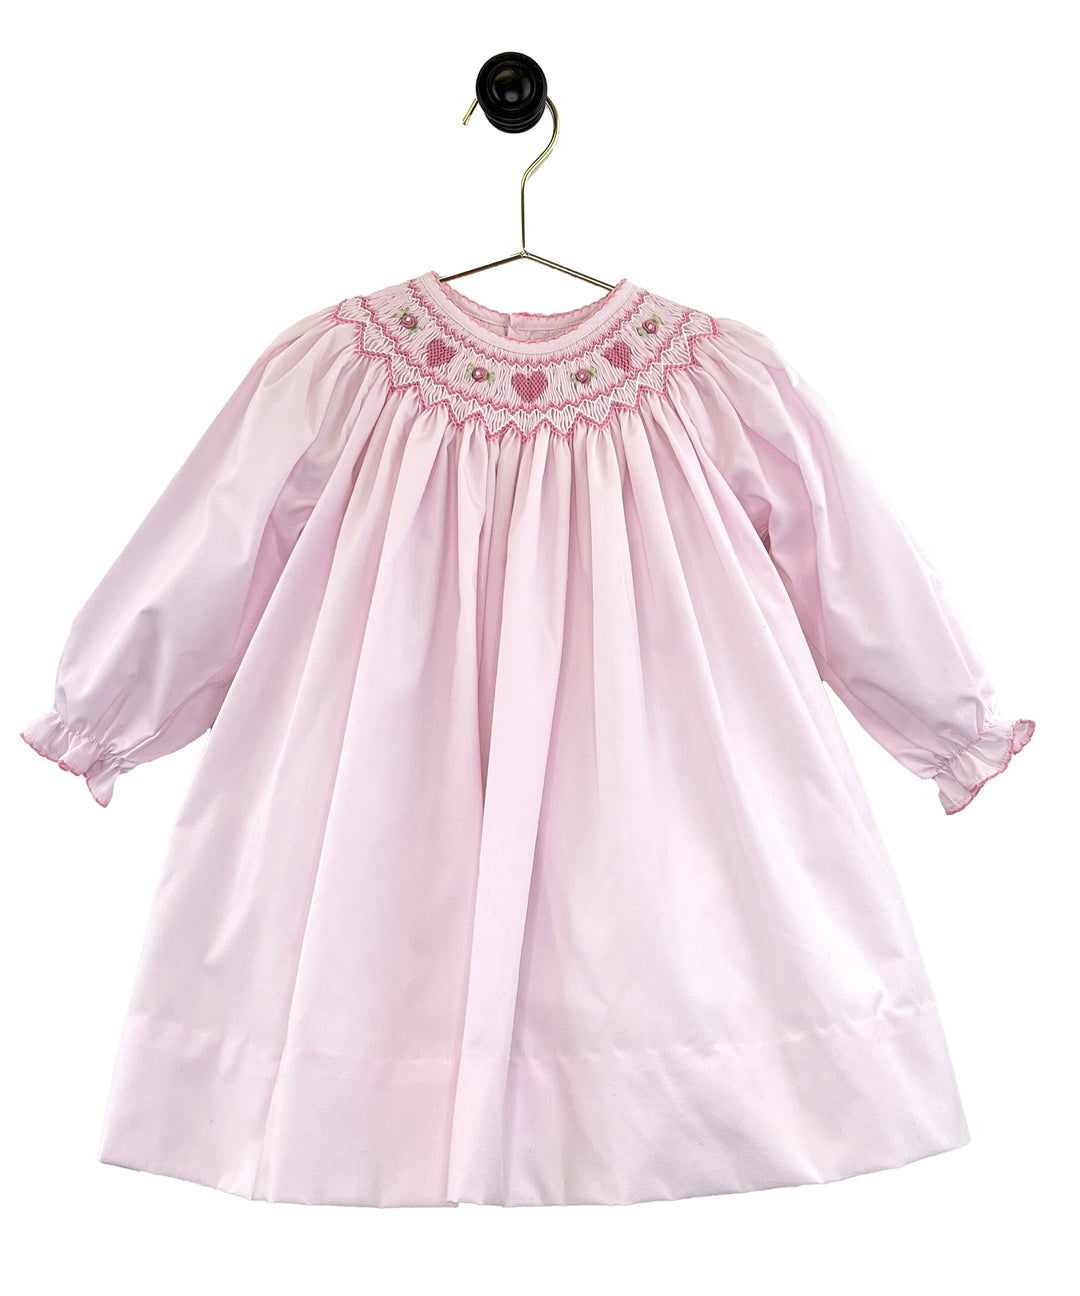 Smocked Heart Dress with Bloomers